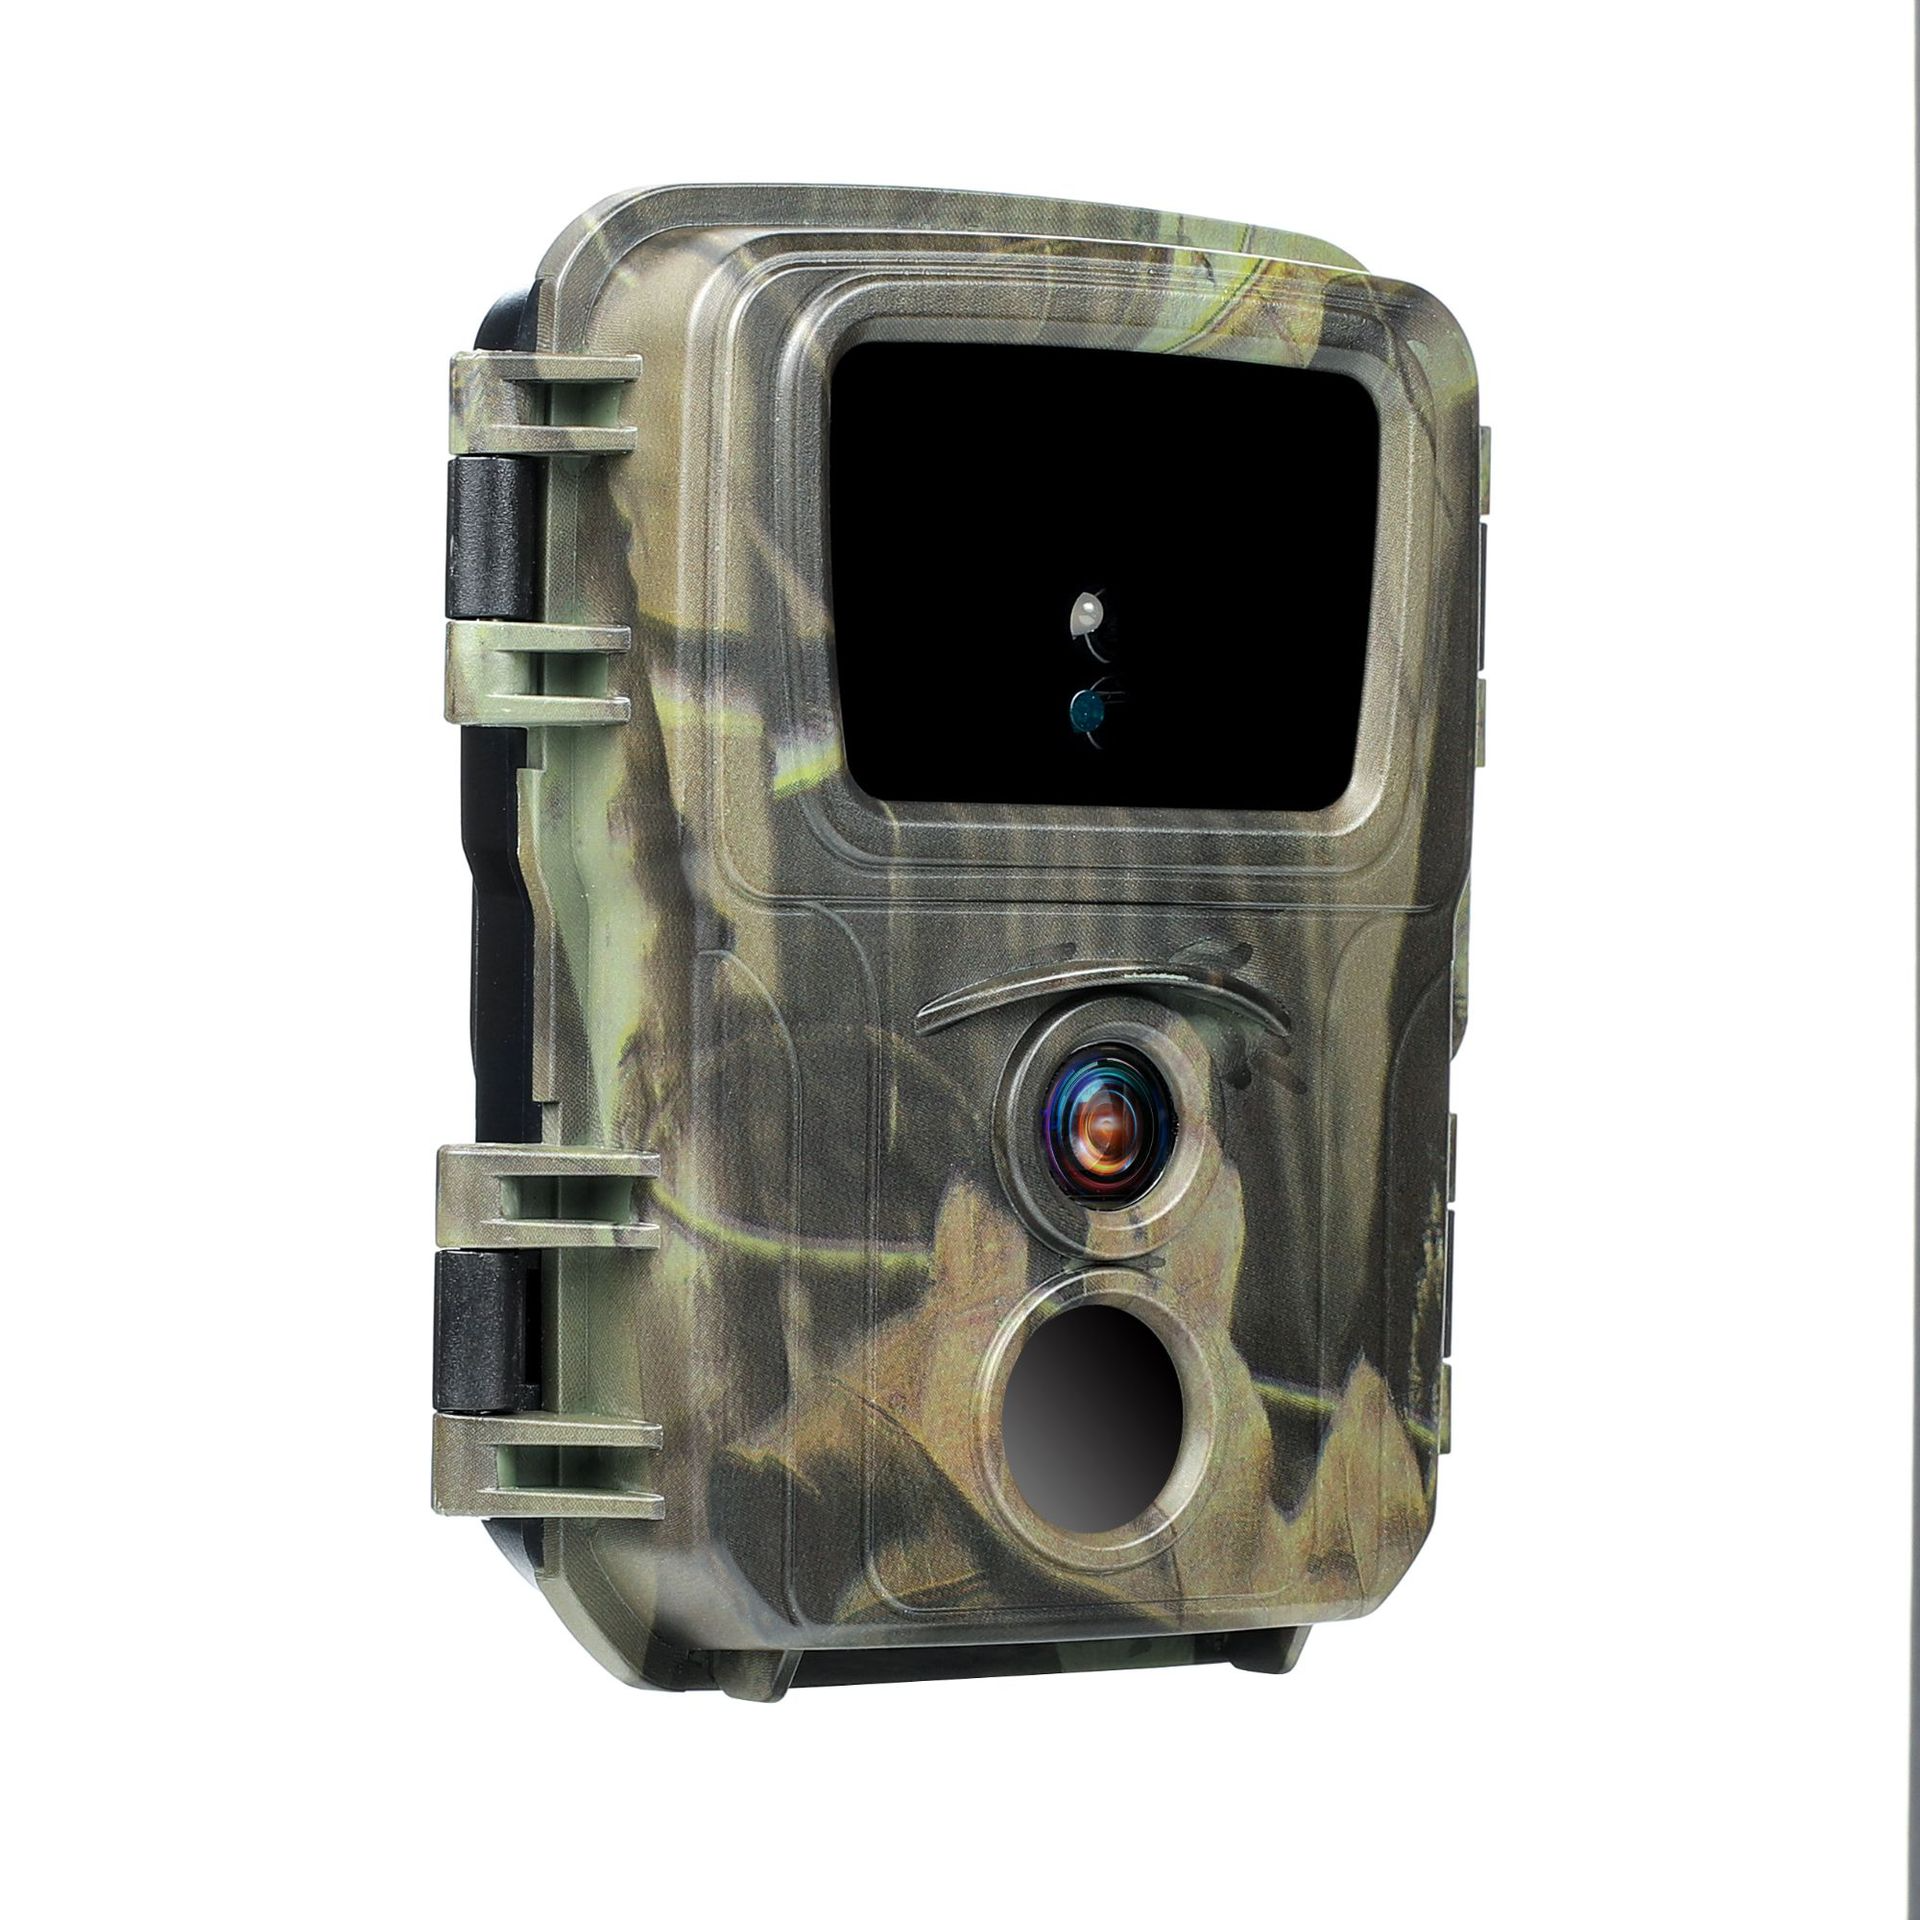 Highly efficient wildlife camera, designed to blend seamlessly into natural environments.